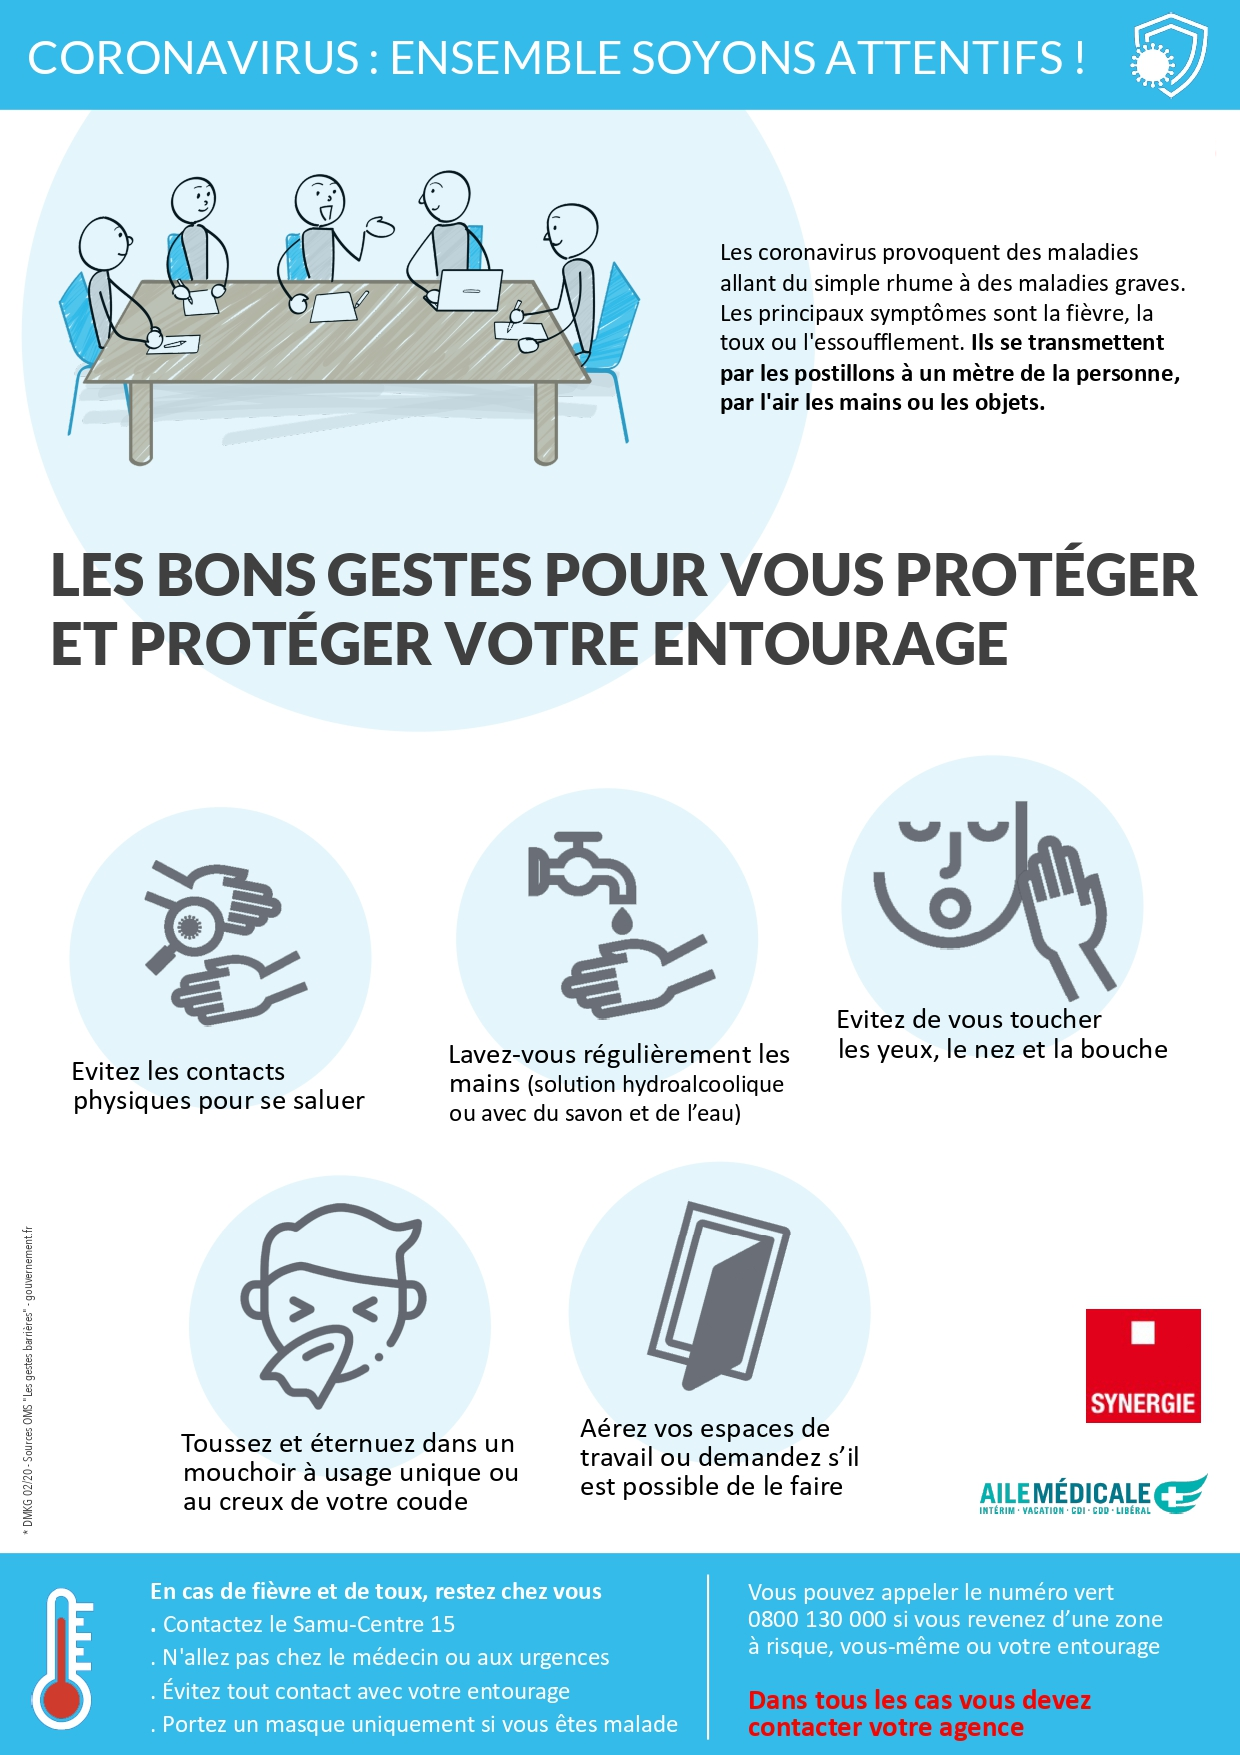 Adoptez les bons gestes - Synergie